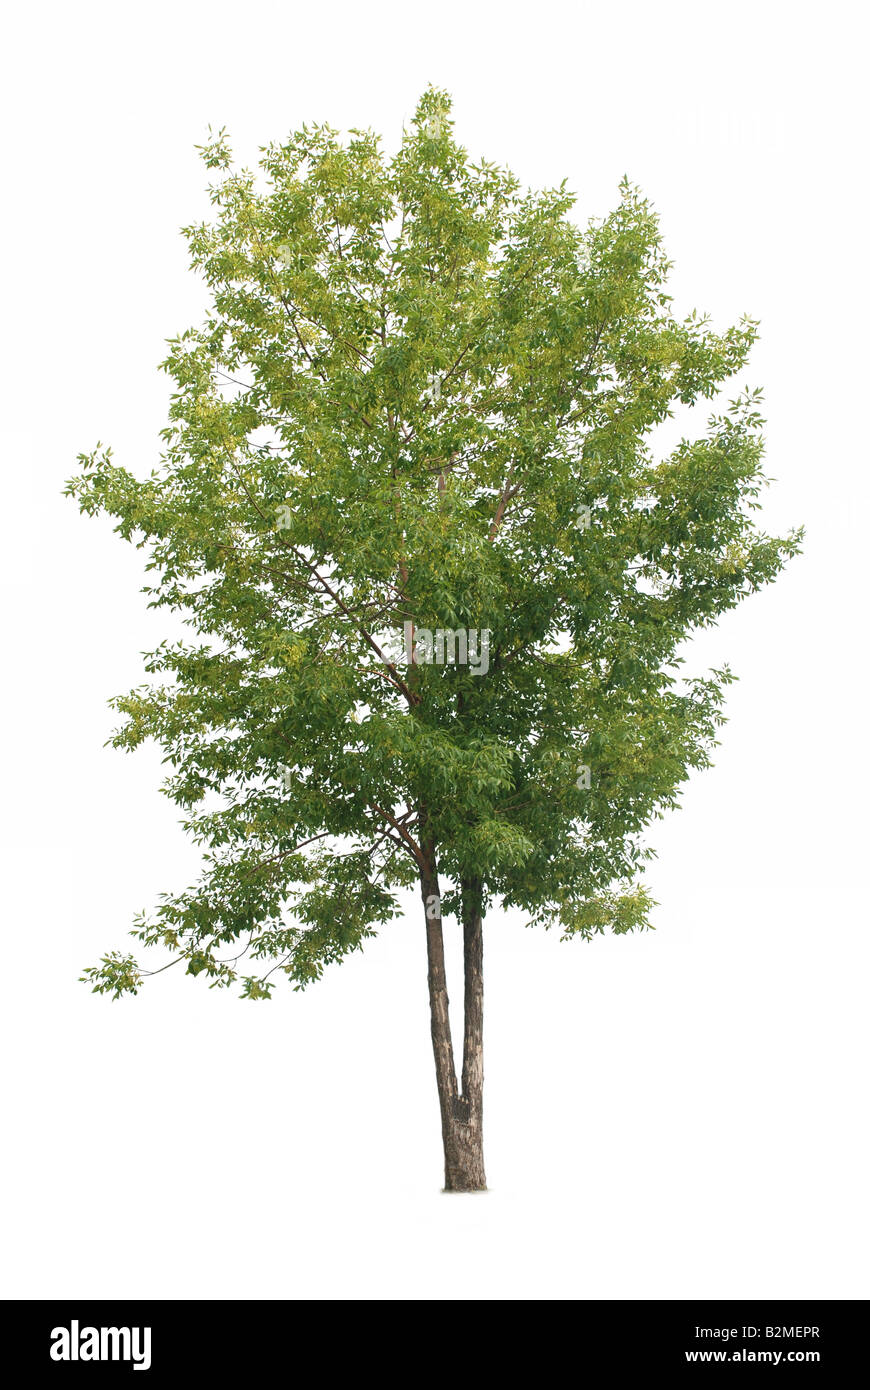 Tree with green leaves isolated on white background Stock Photo